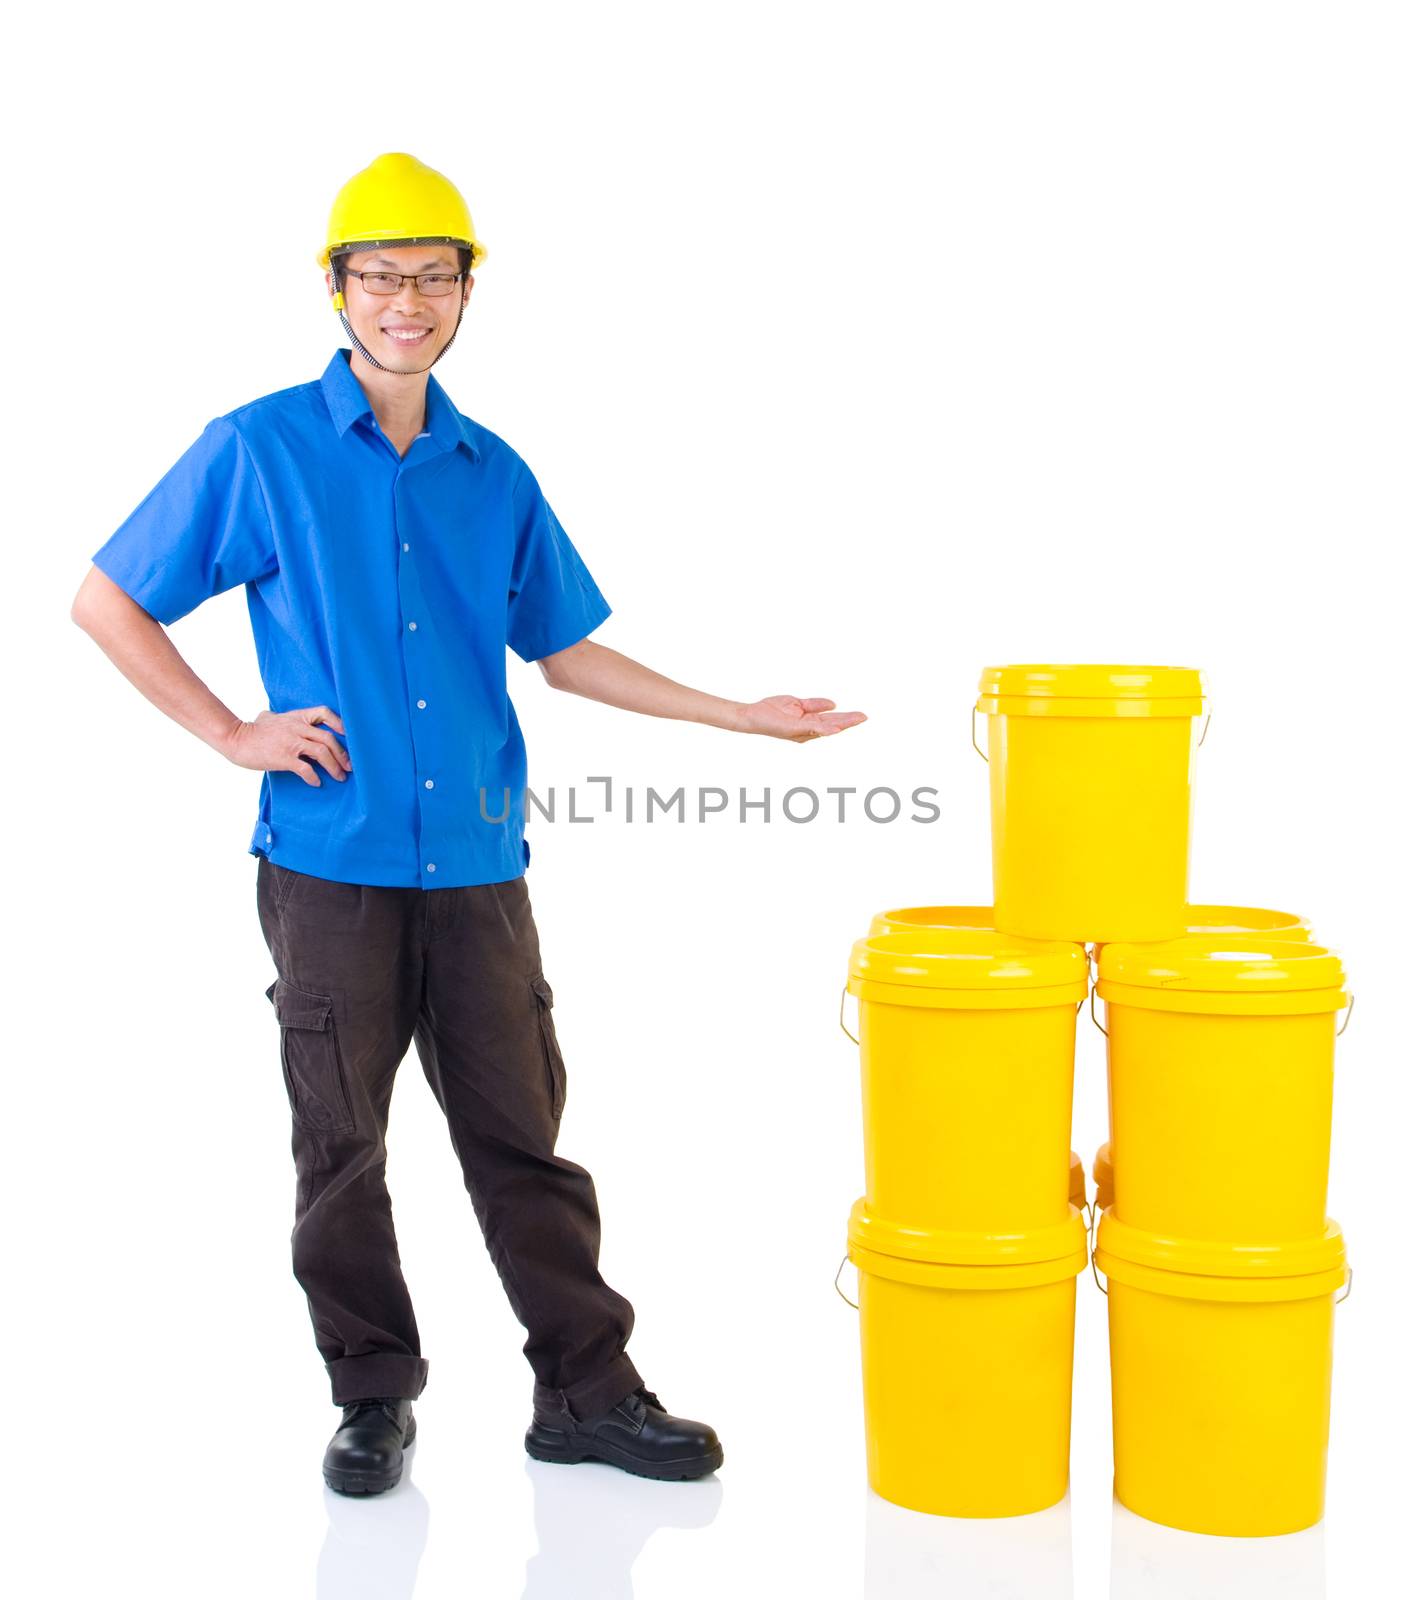 Lubricant oils and greases distributor with suit hardhat pointing his hand over the products , thumb-up, isolated on white background.